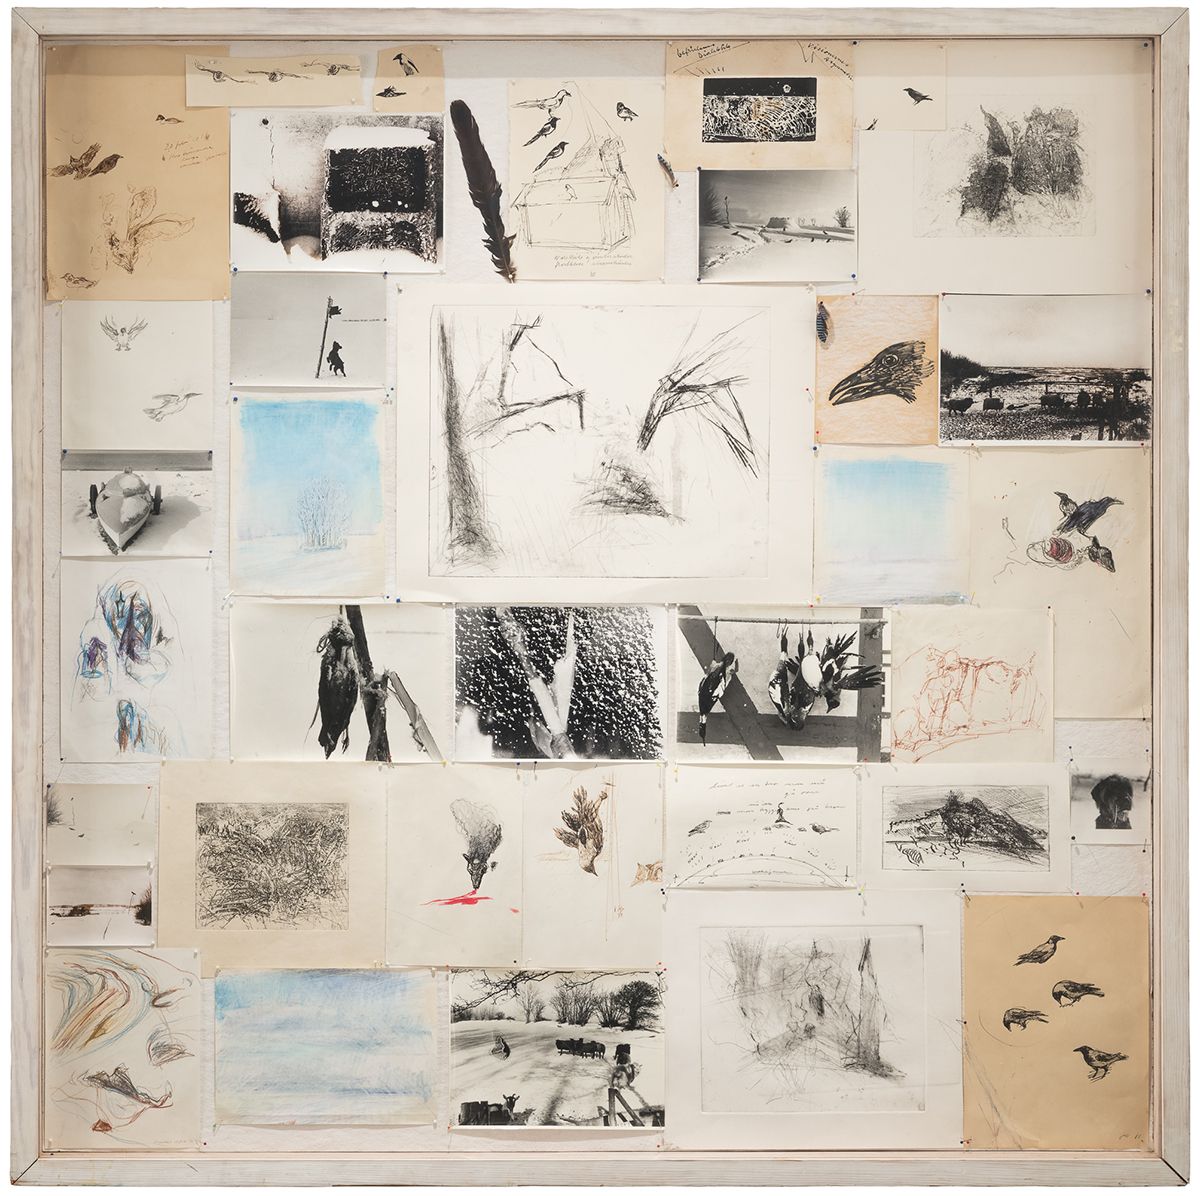 John Olsen, <i>Winter</i>, 1981. 128 x 128 cm; 5,7 cm. Drawings, photos, etchings and bird feathers<br>Purchased 1981 by the Danish Arts Foundation. Received 1998. Inv. nr. 1998-022<br>©The artist's heirs. Photo: Per Andersen